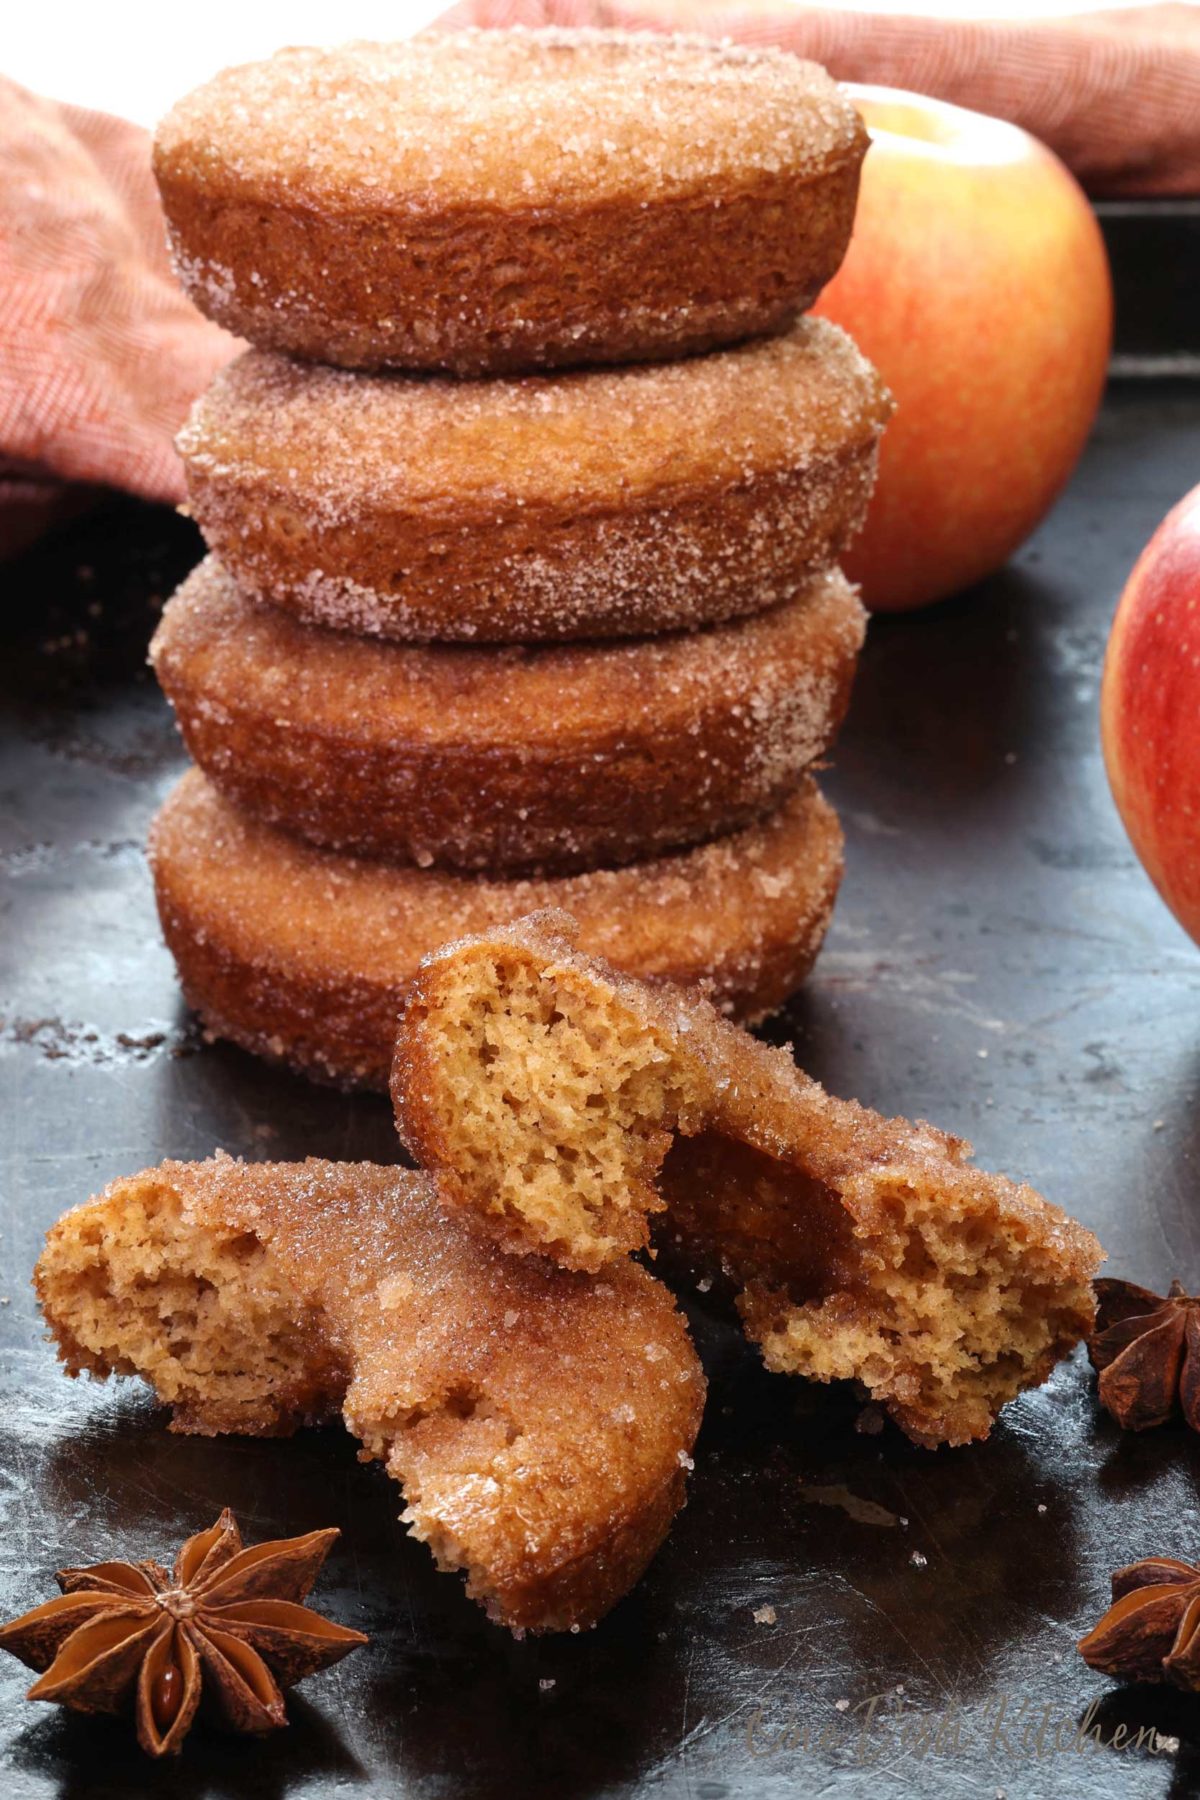 A stack of apple cider donuts on a baking sheet next to one donut cut in half.